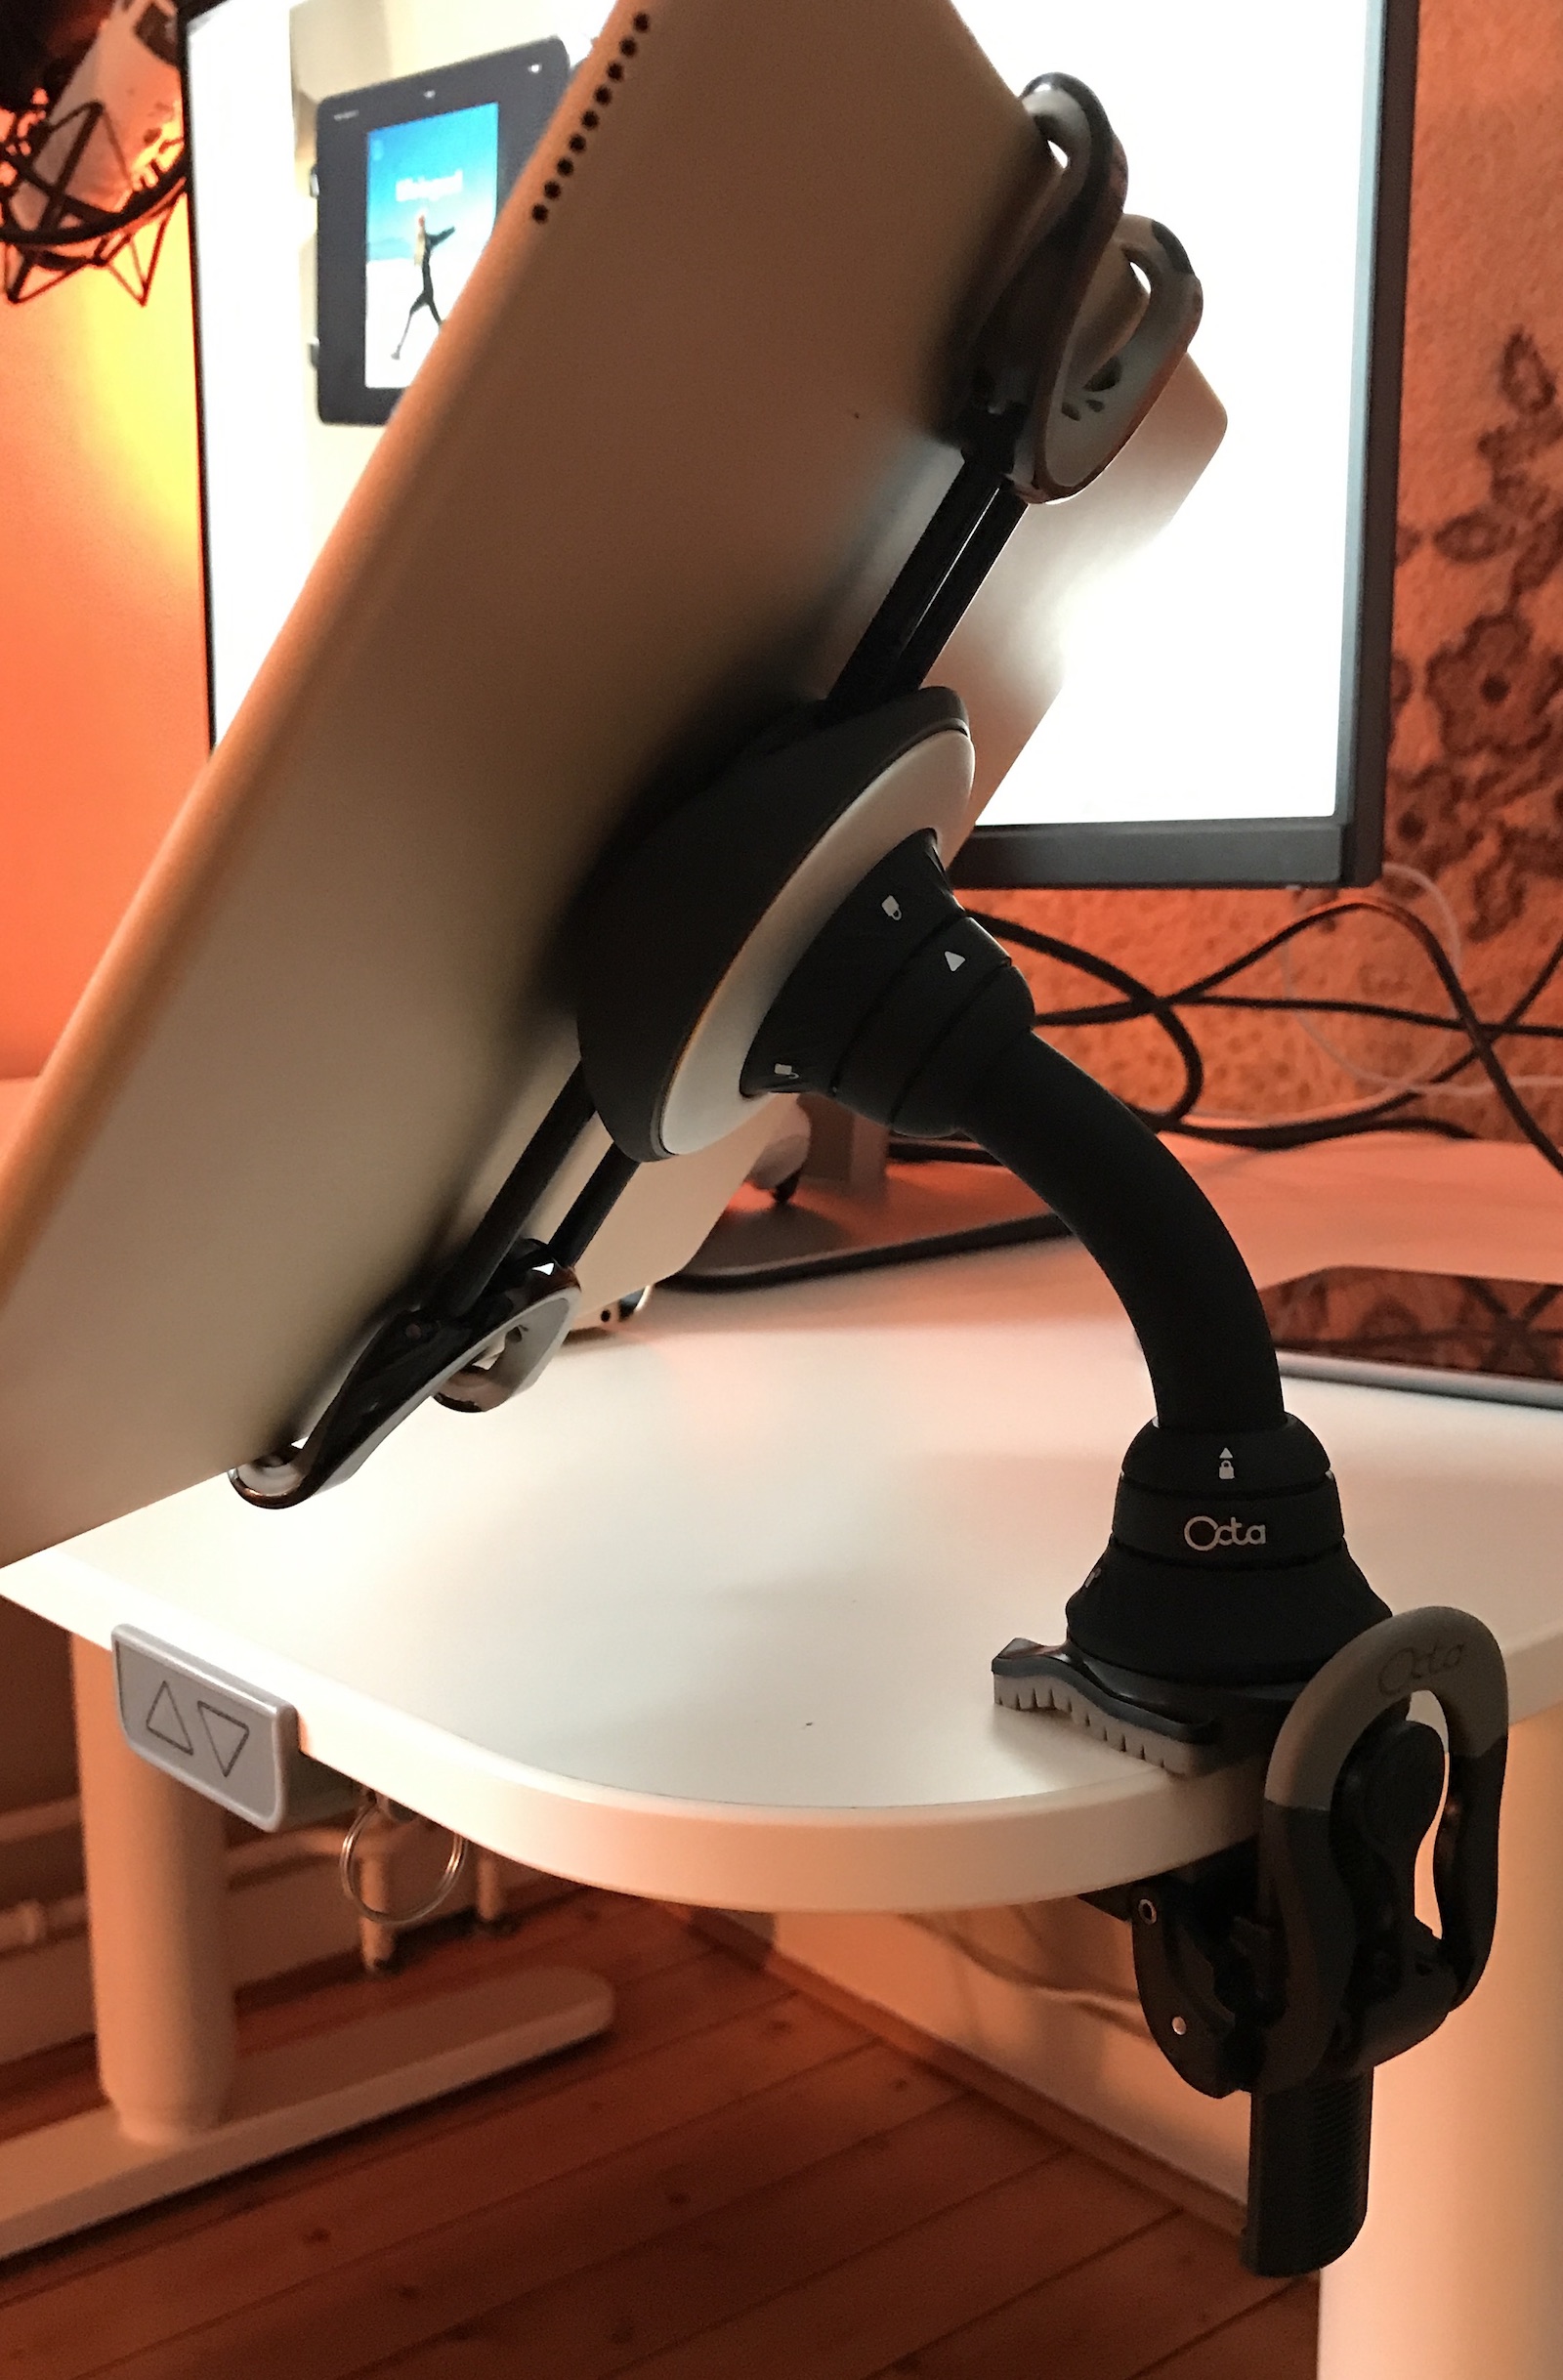 Clamp with Ipad pro attached